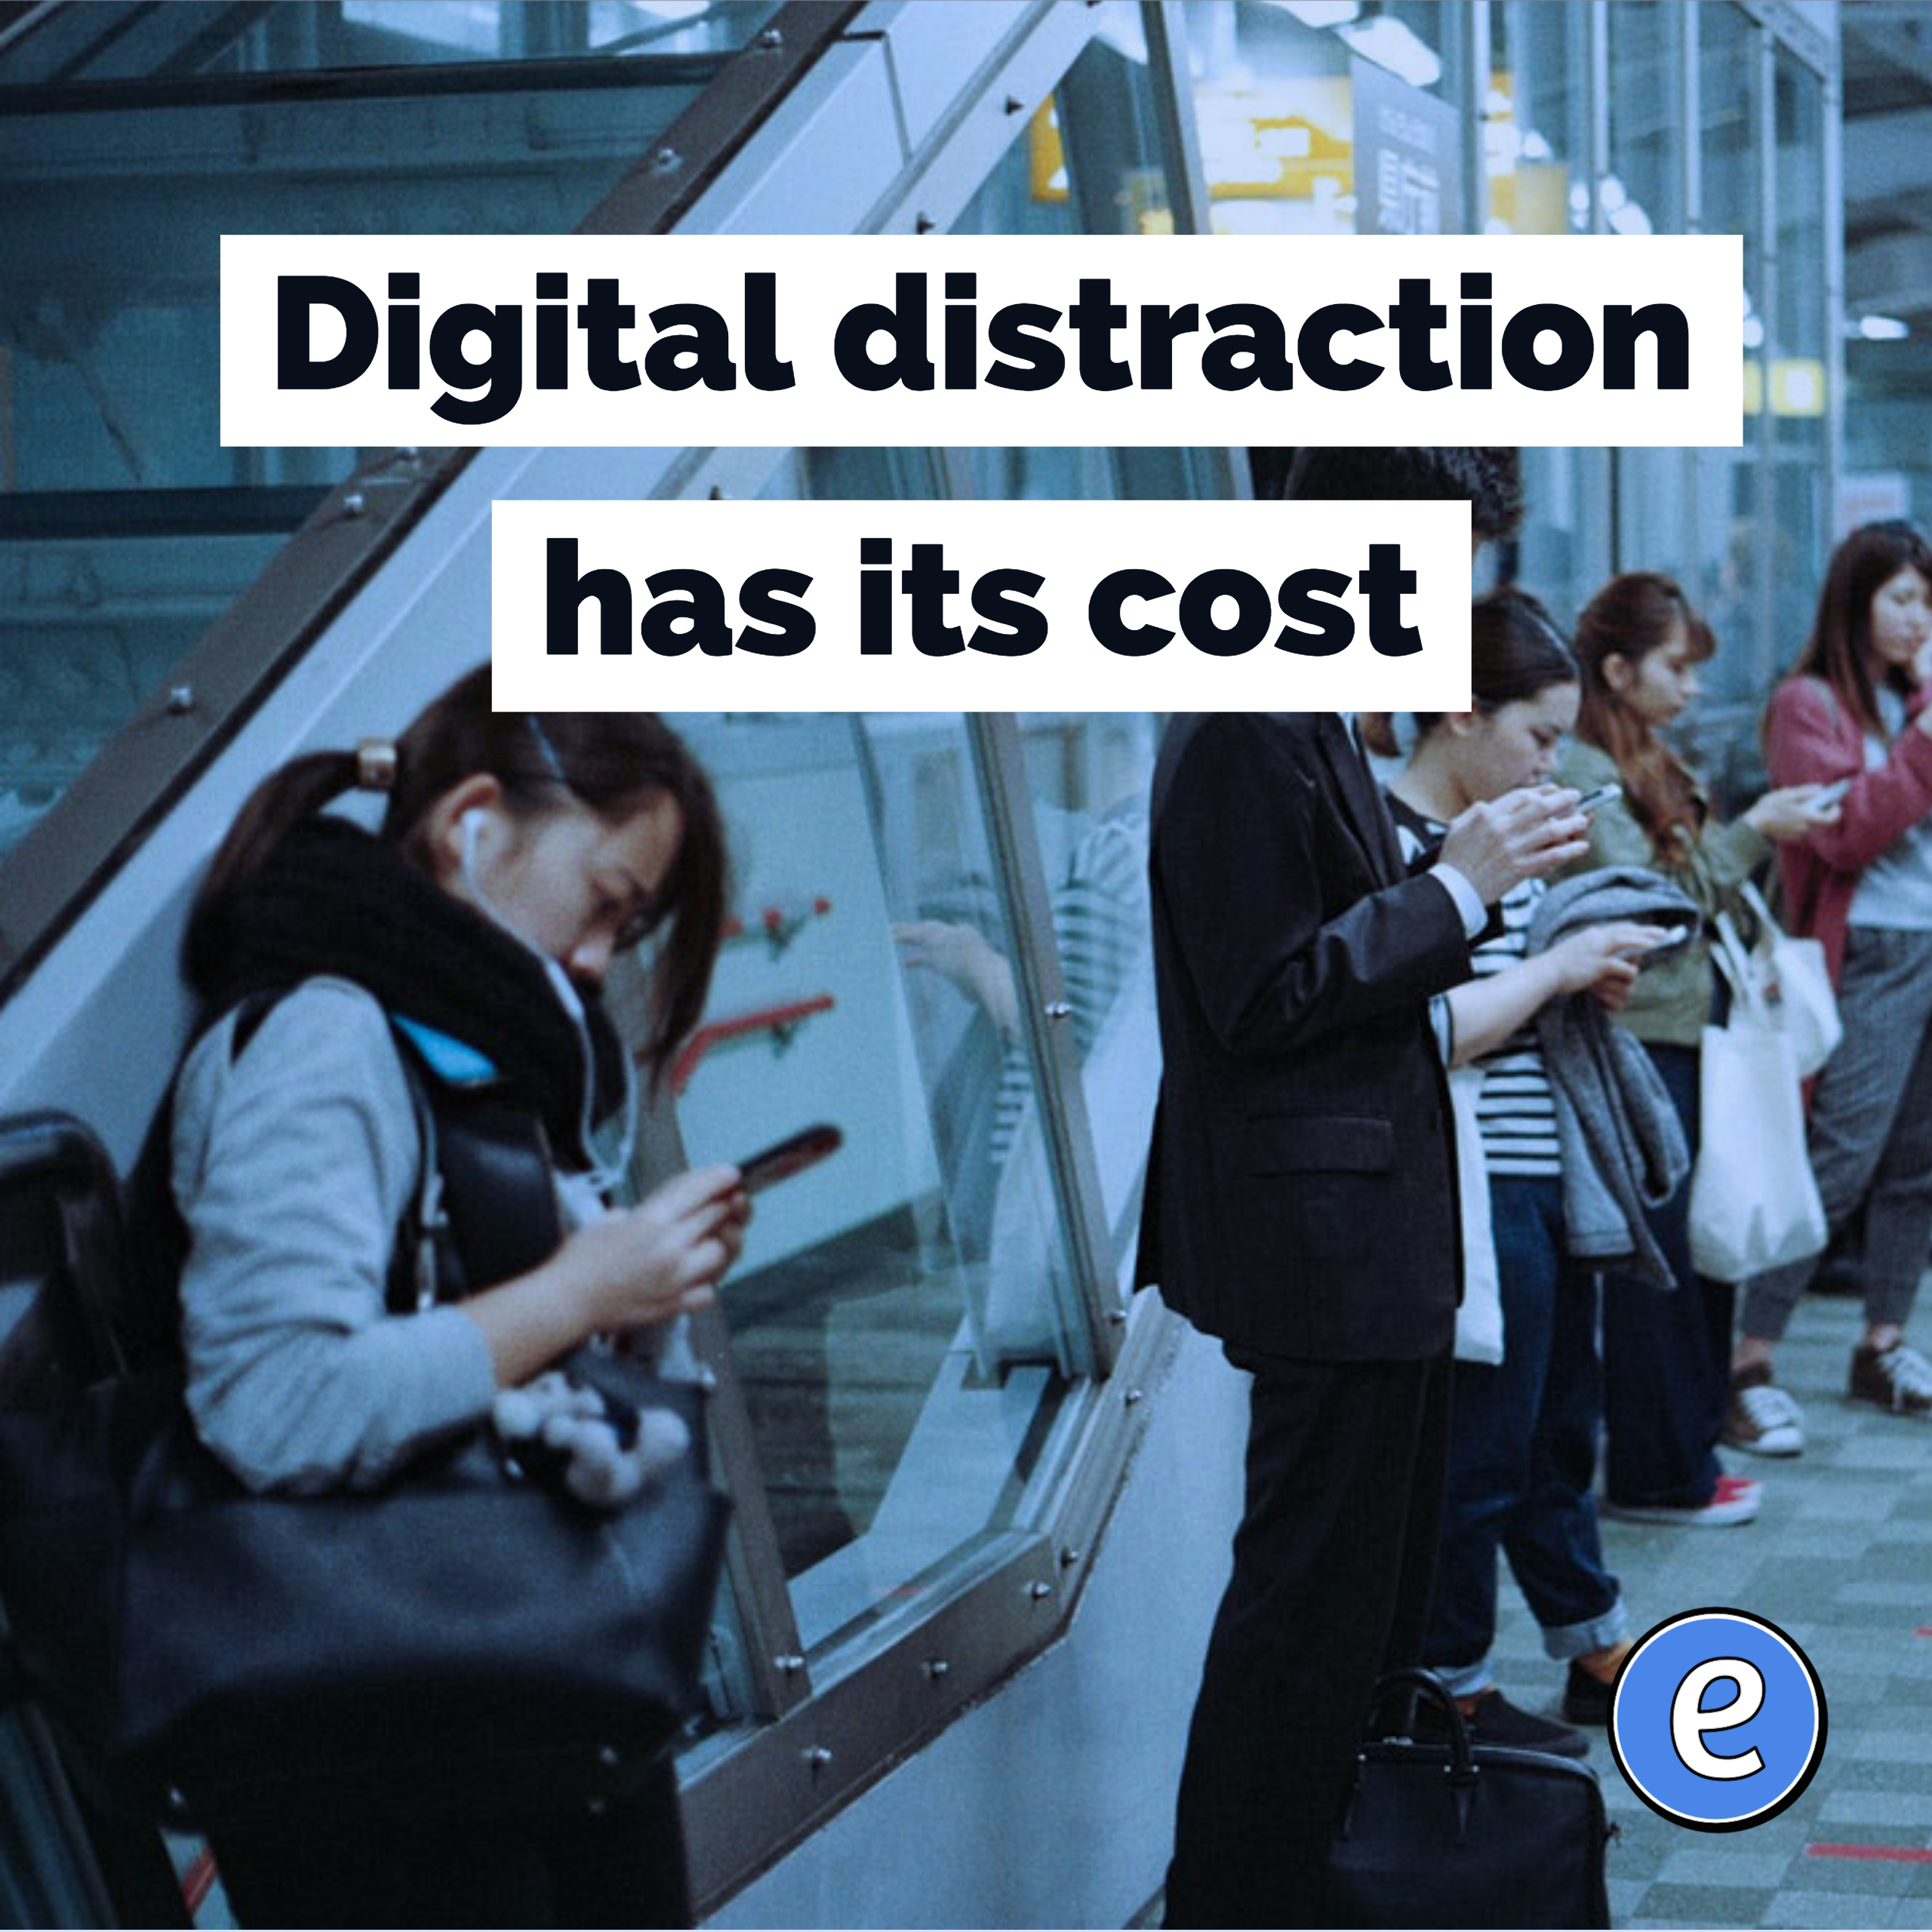 Digital distraction has its cost